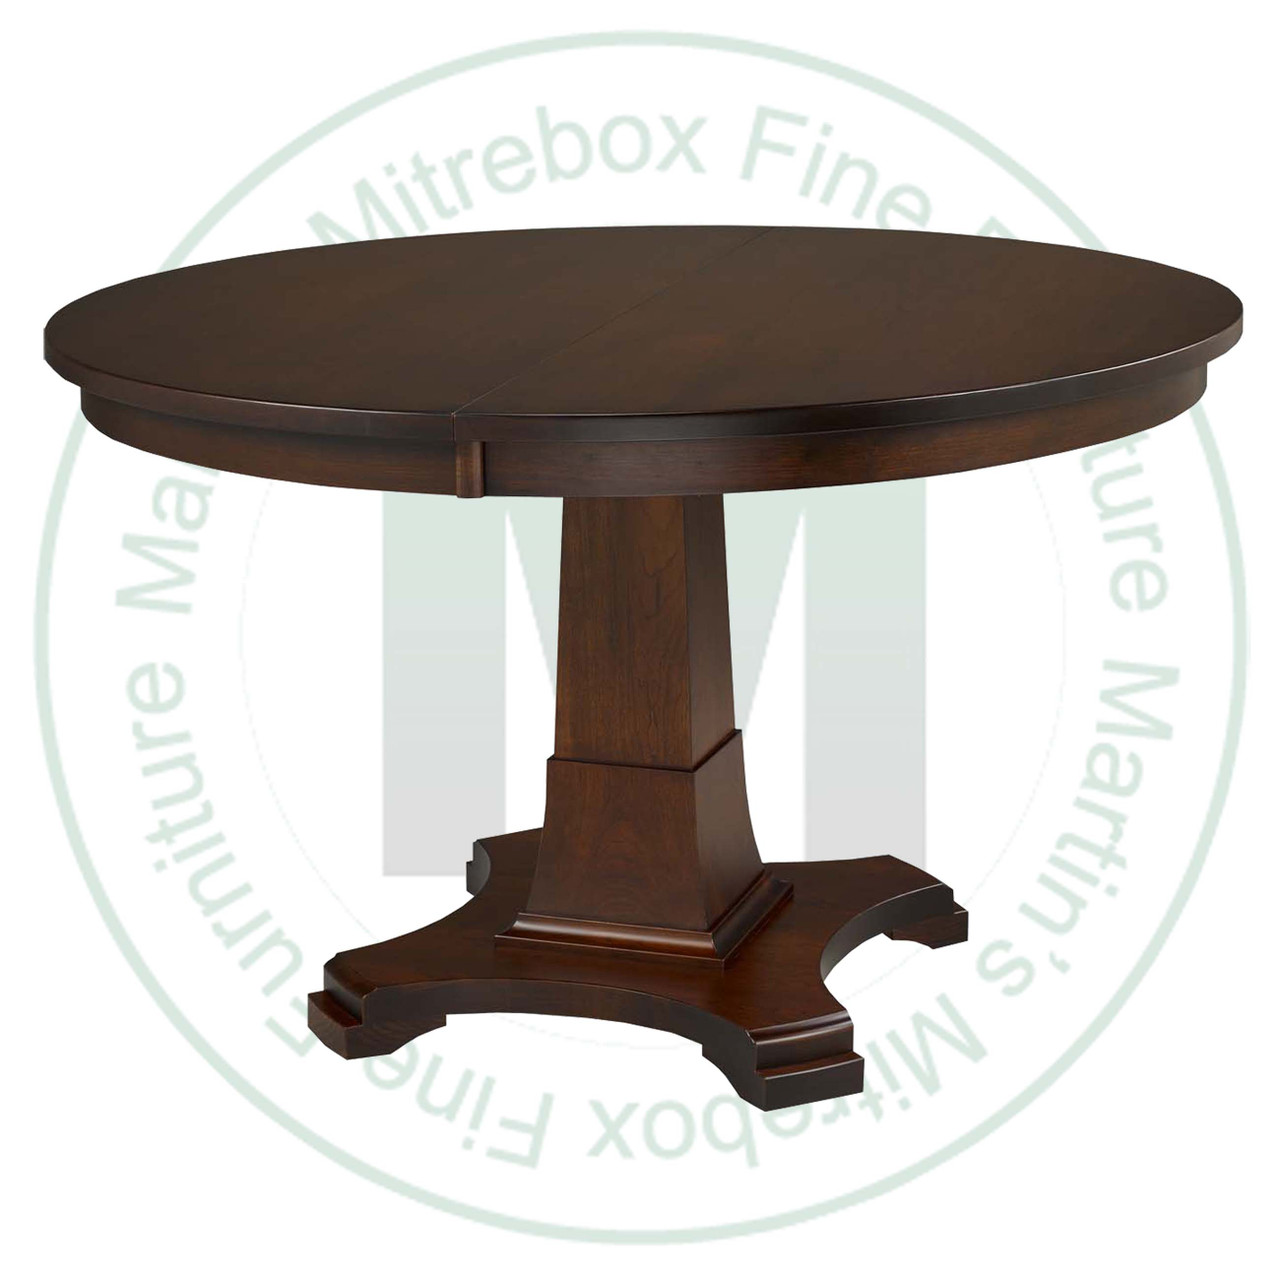 Wormy Maple Abbey Single Pedestal Table 60''D x 60''W x 30''H Round Solid Table. Table Has 1.25'' Thick Top